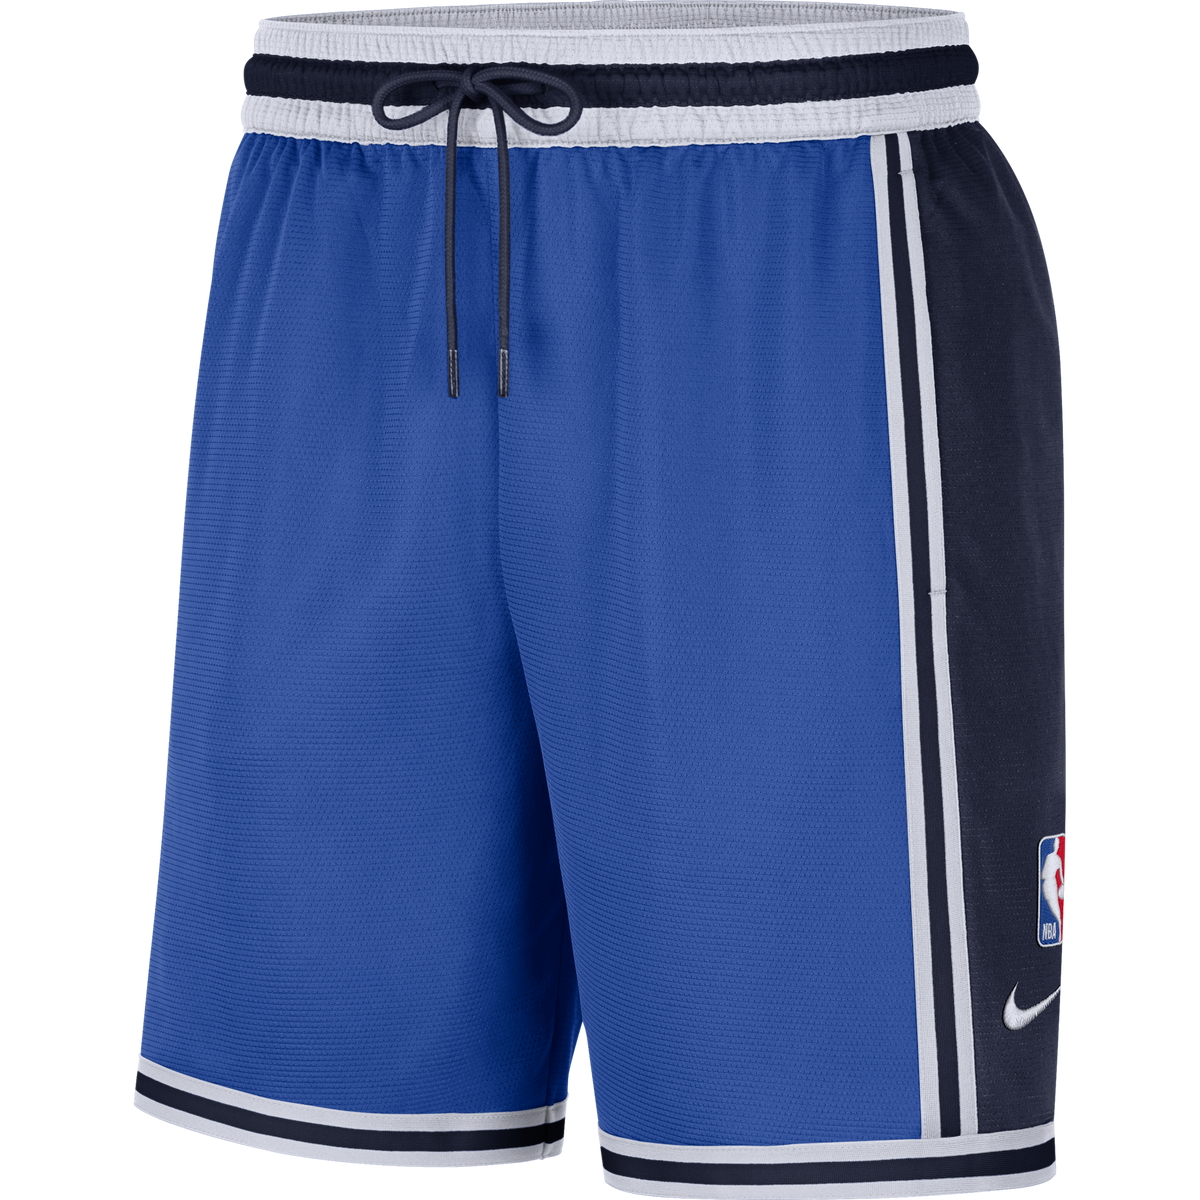 Nike Pro NBA Compression Shorts Player Issue PE 880802-419 Navy Tight  Basketball